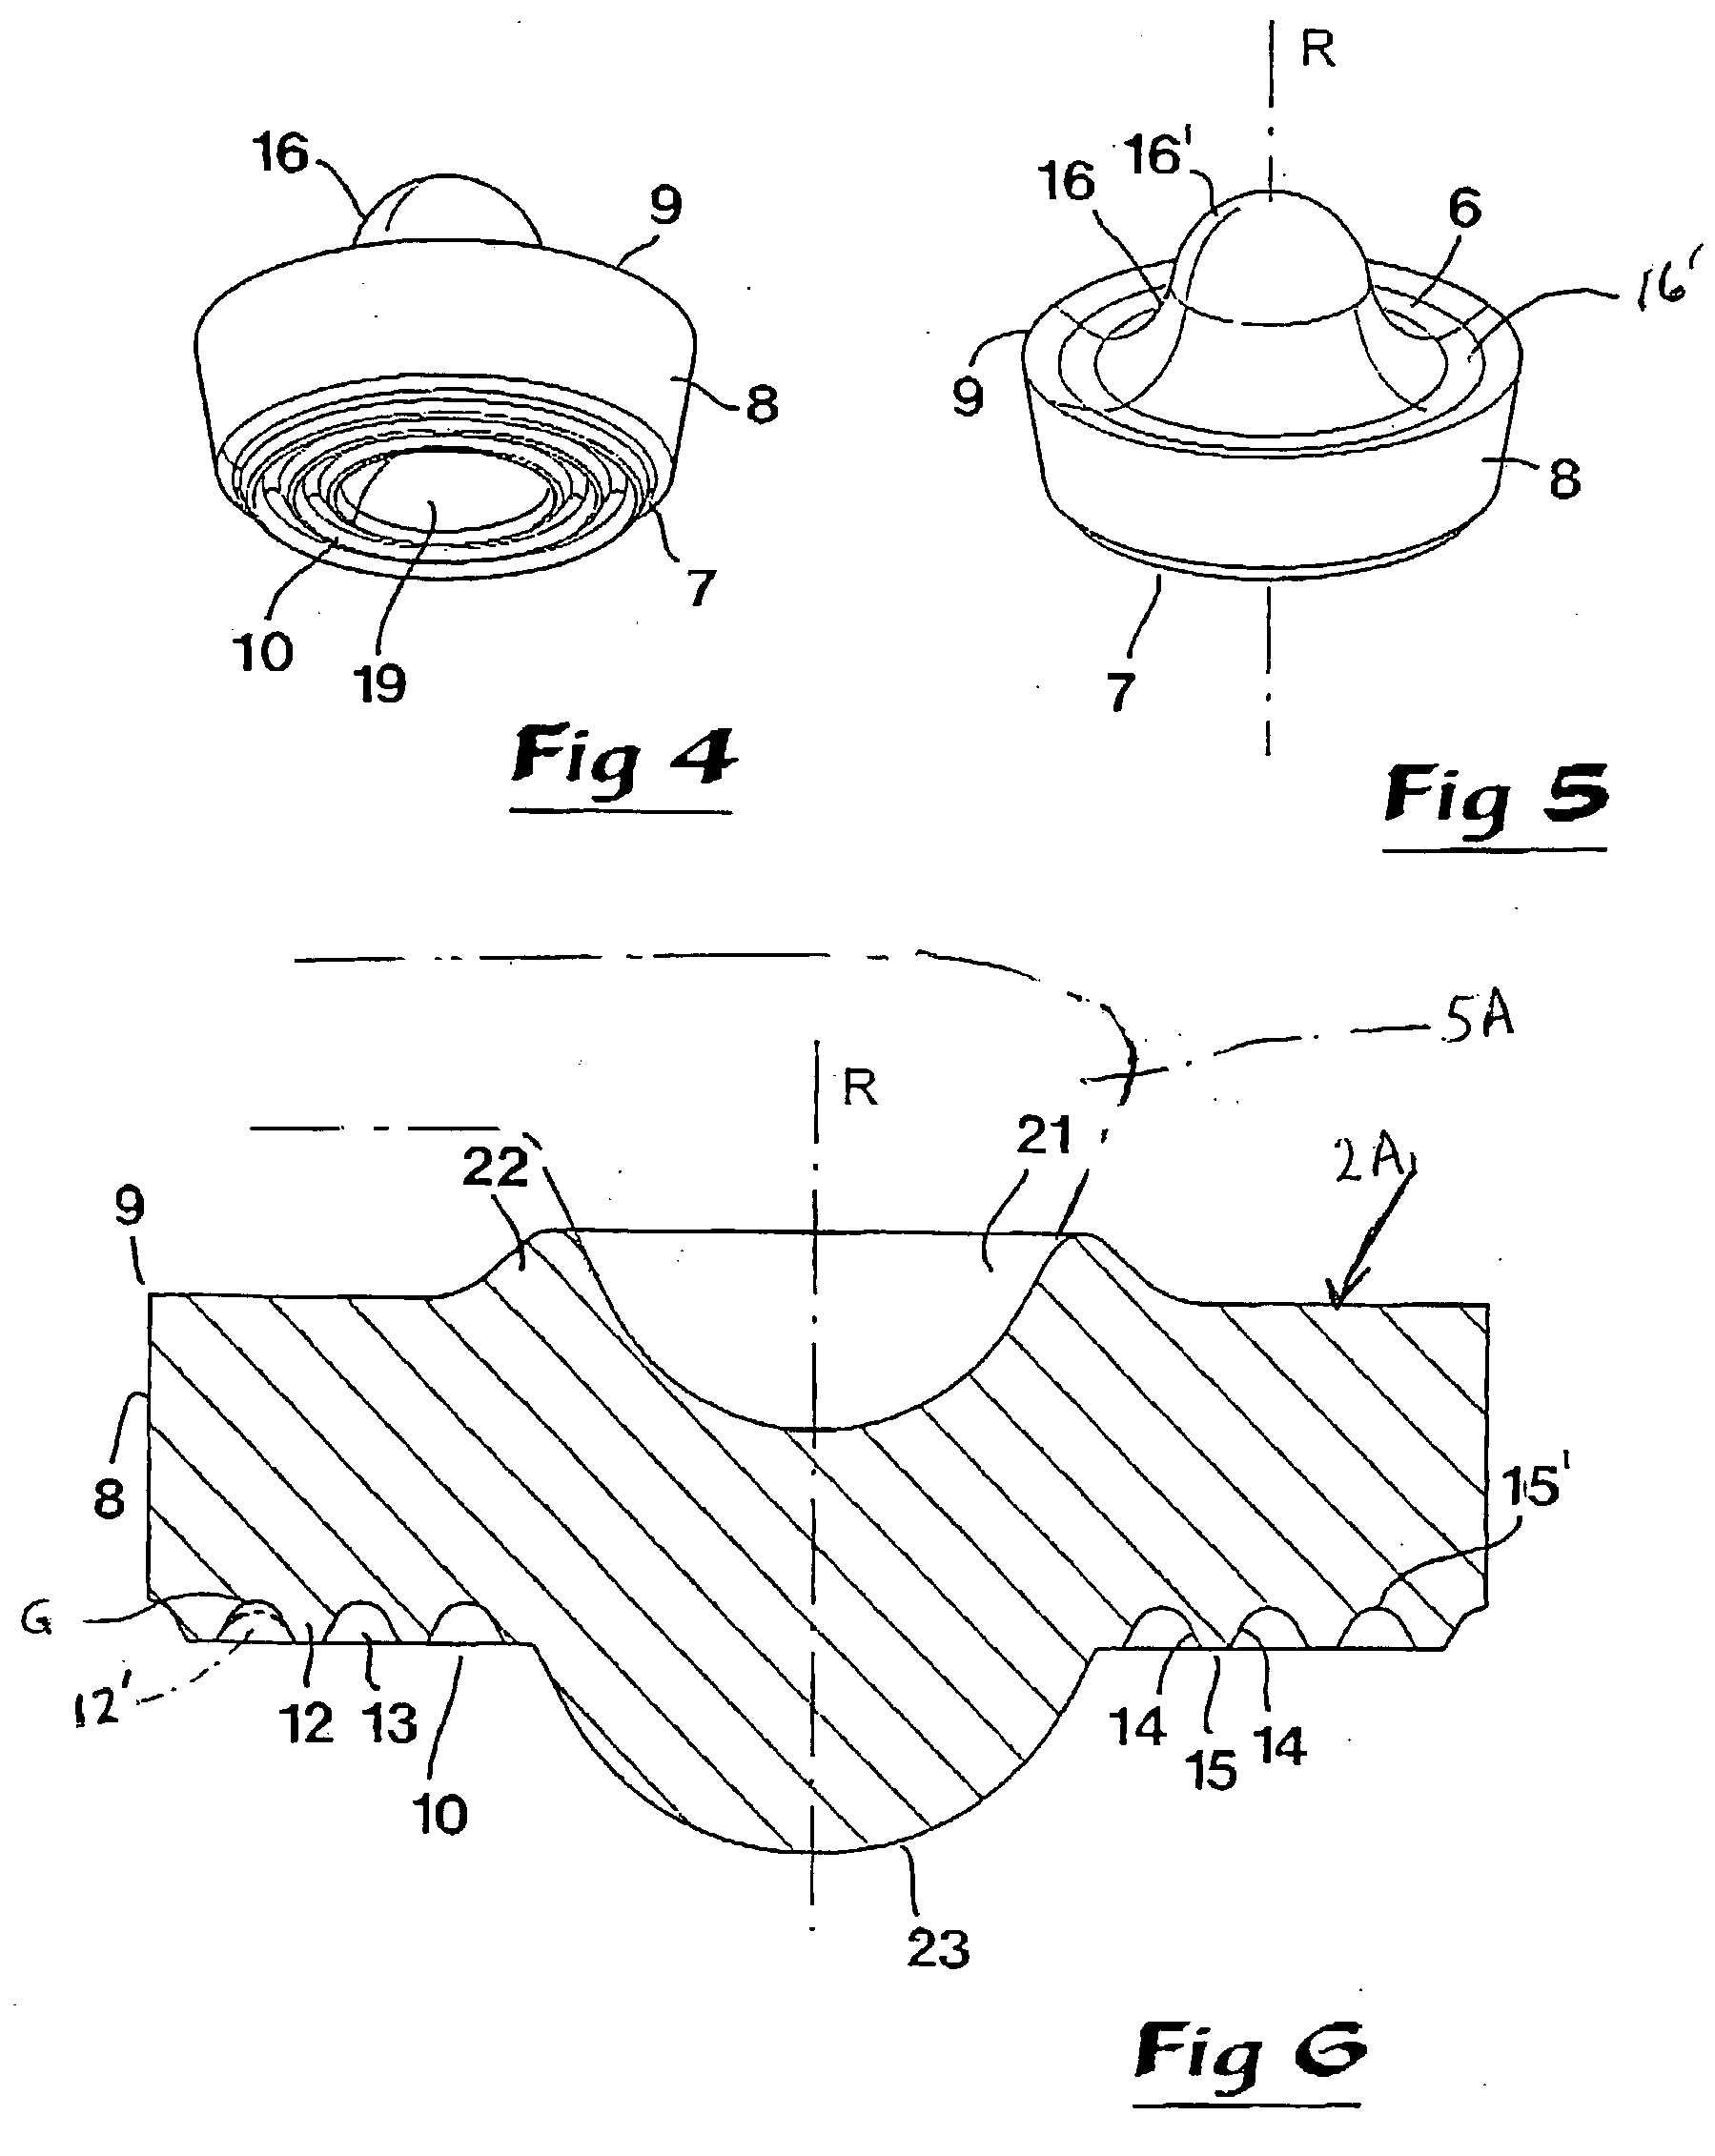 Tool for chip removing machining and rotatable cutting insert for such tools